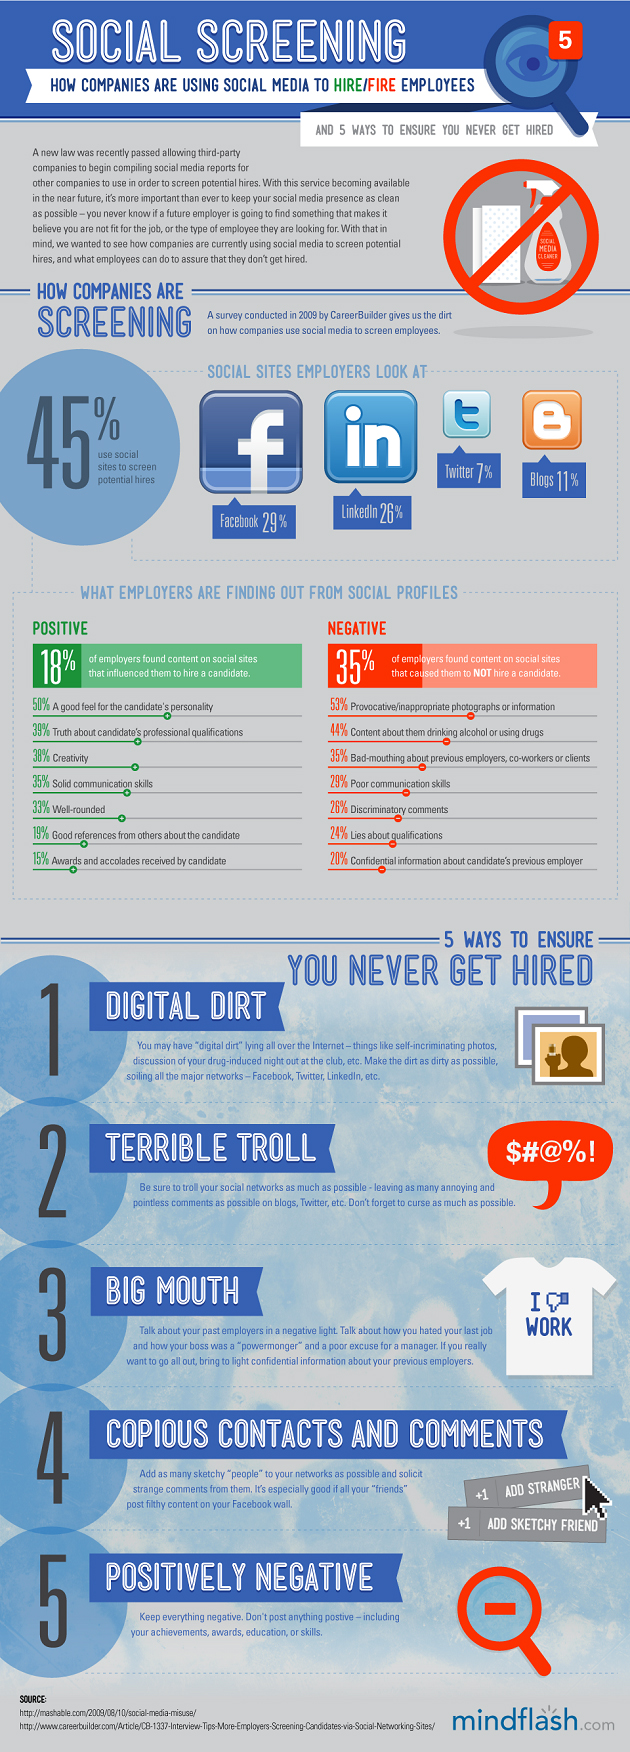 How Employers Use Social Media to Hire and Fire?